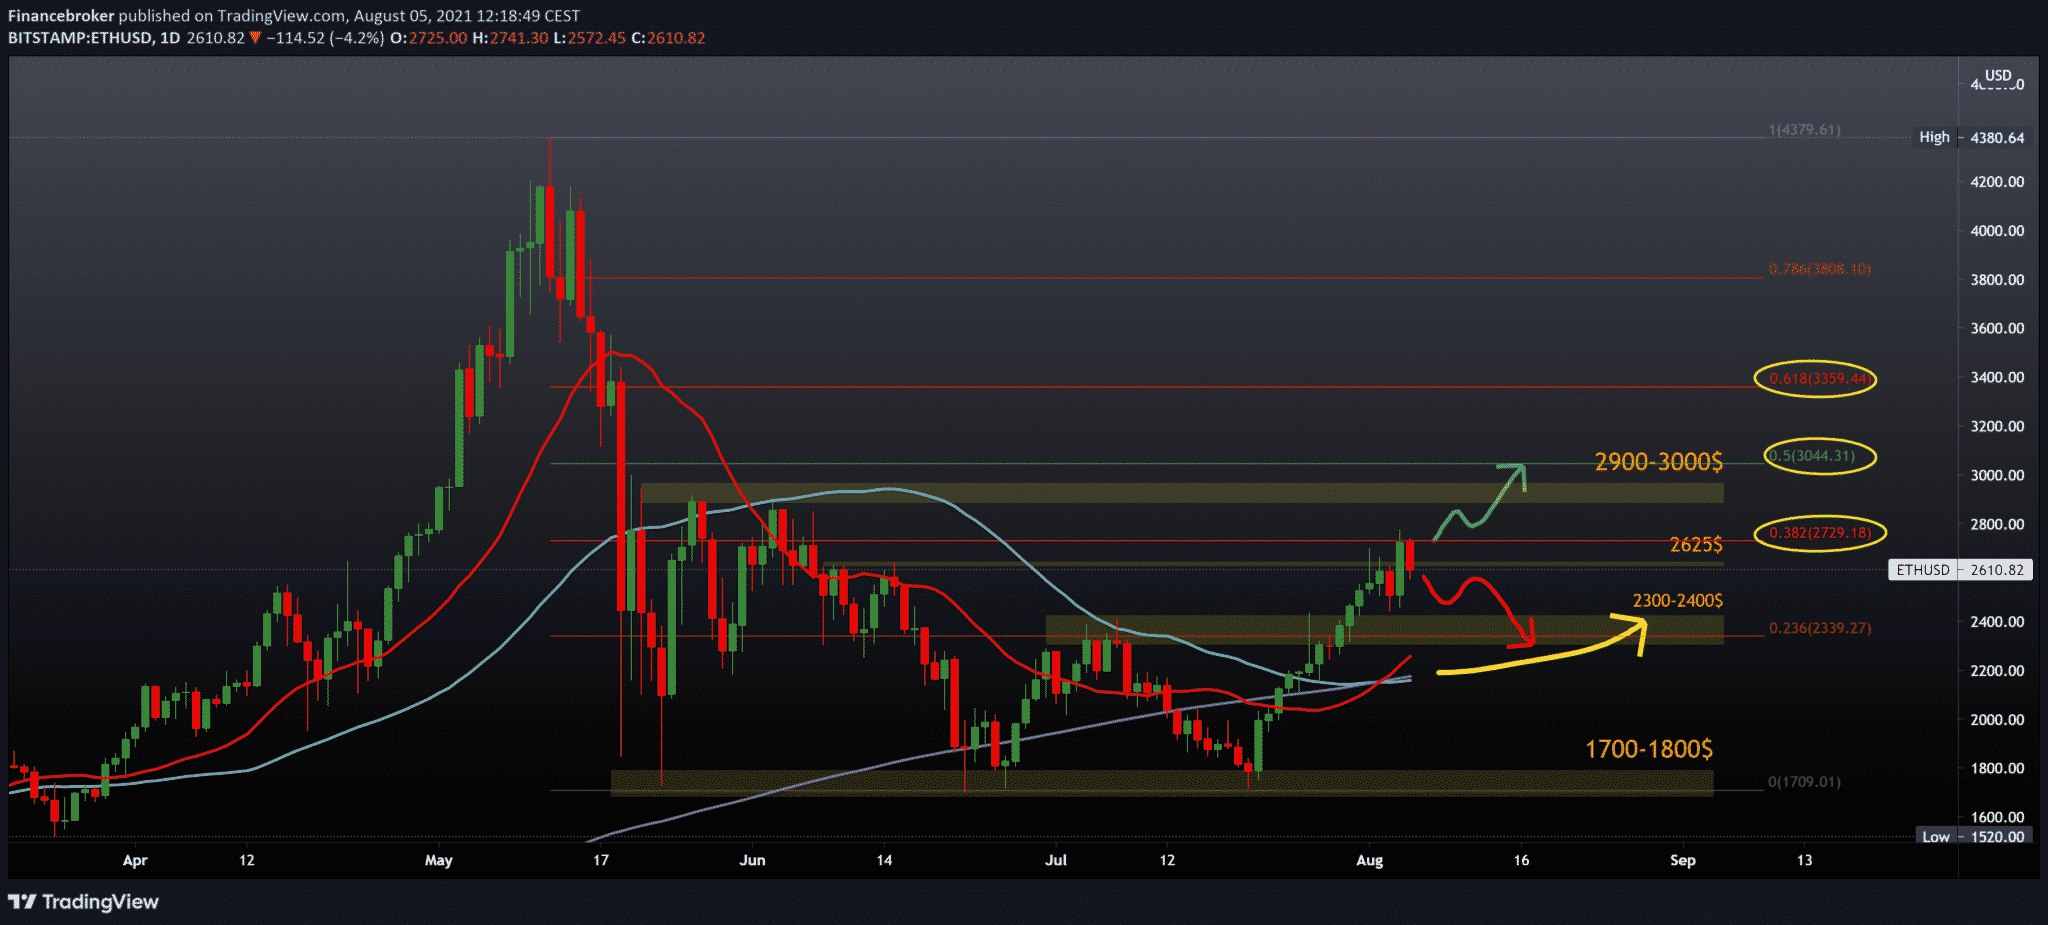 BTCUSD, ETHUSD and Dogecoin are going back on bearish territory